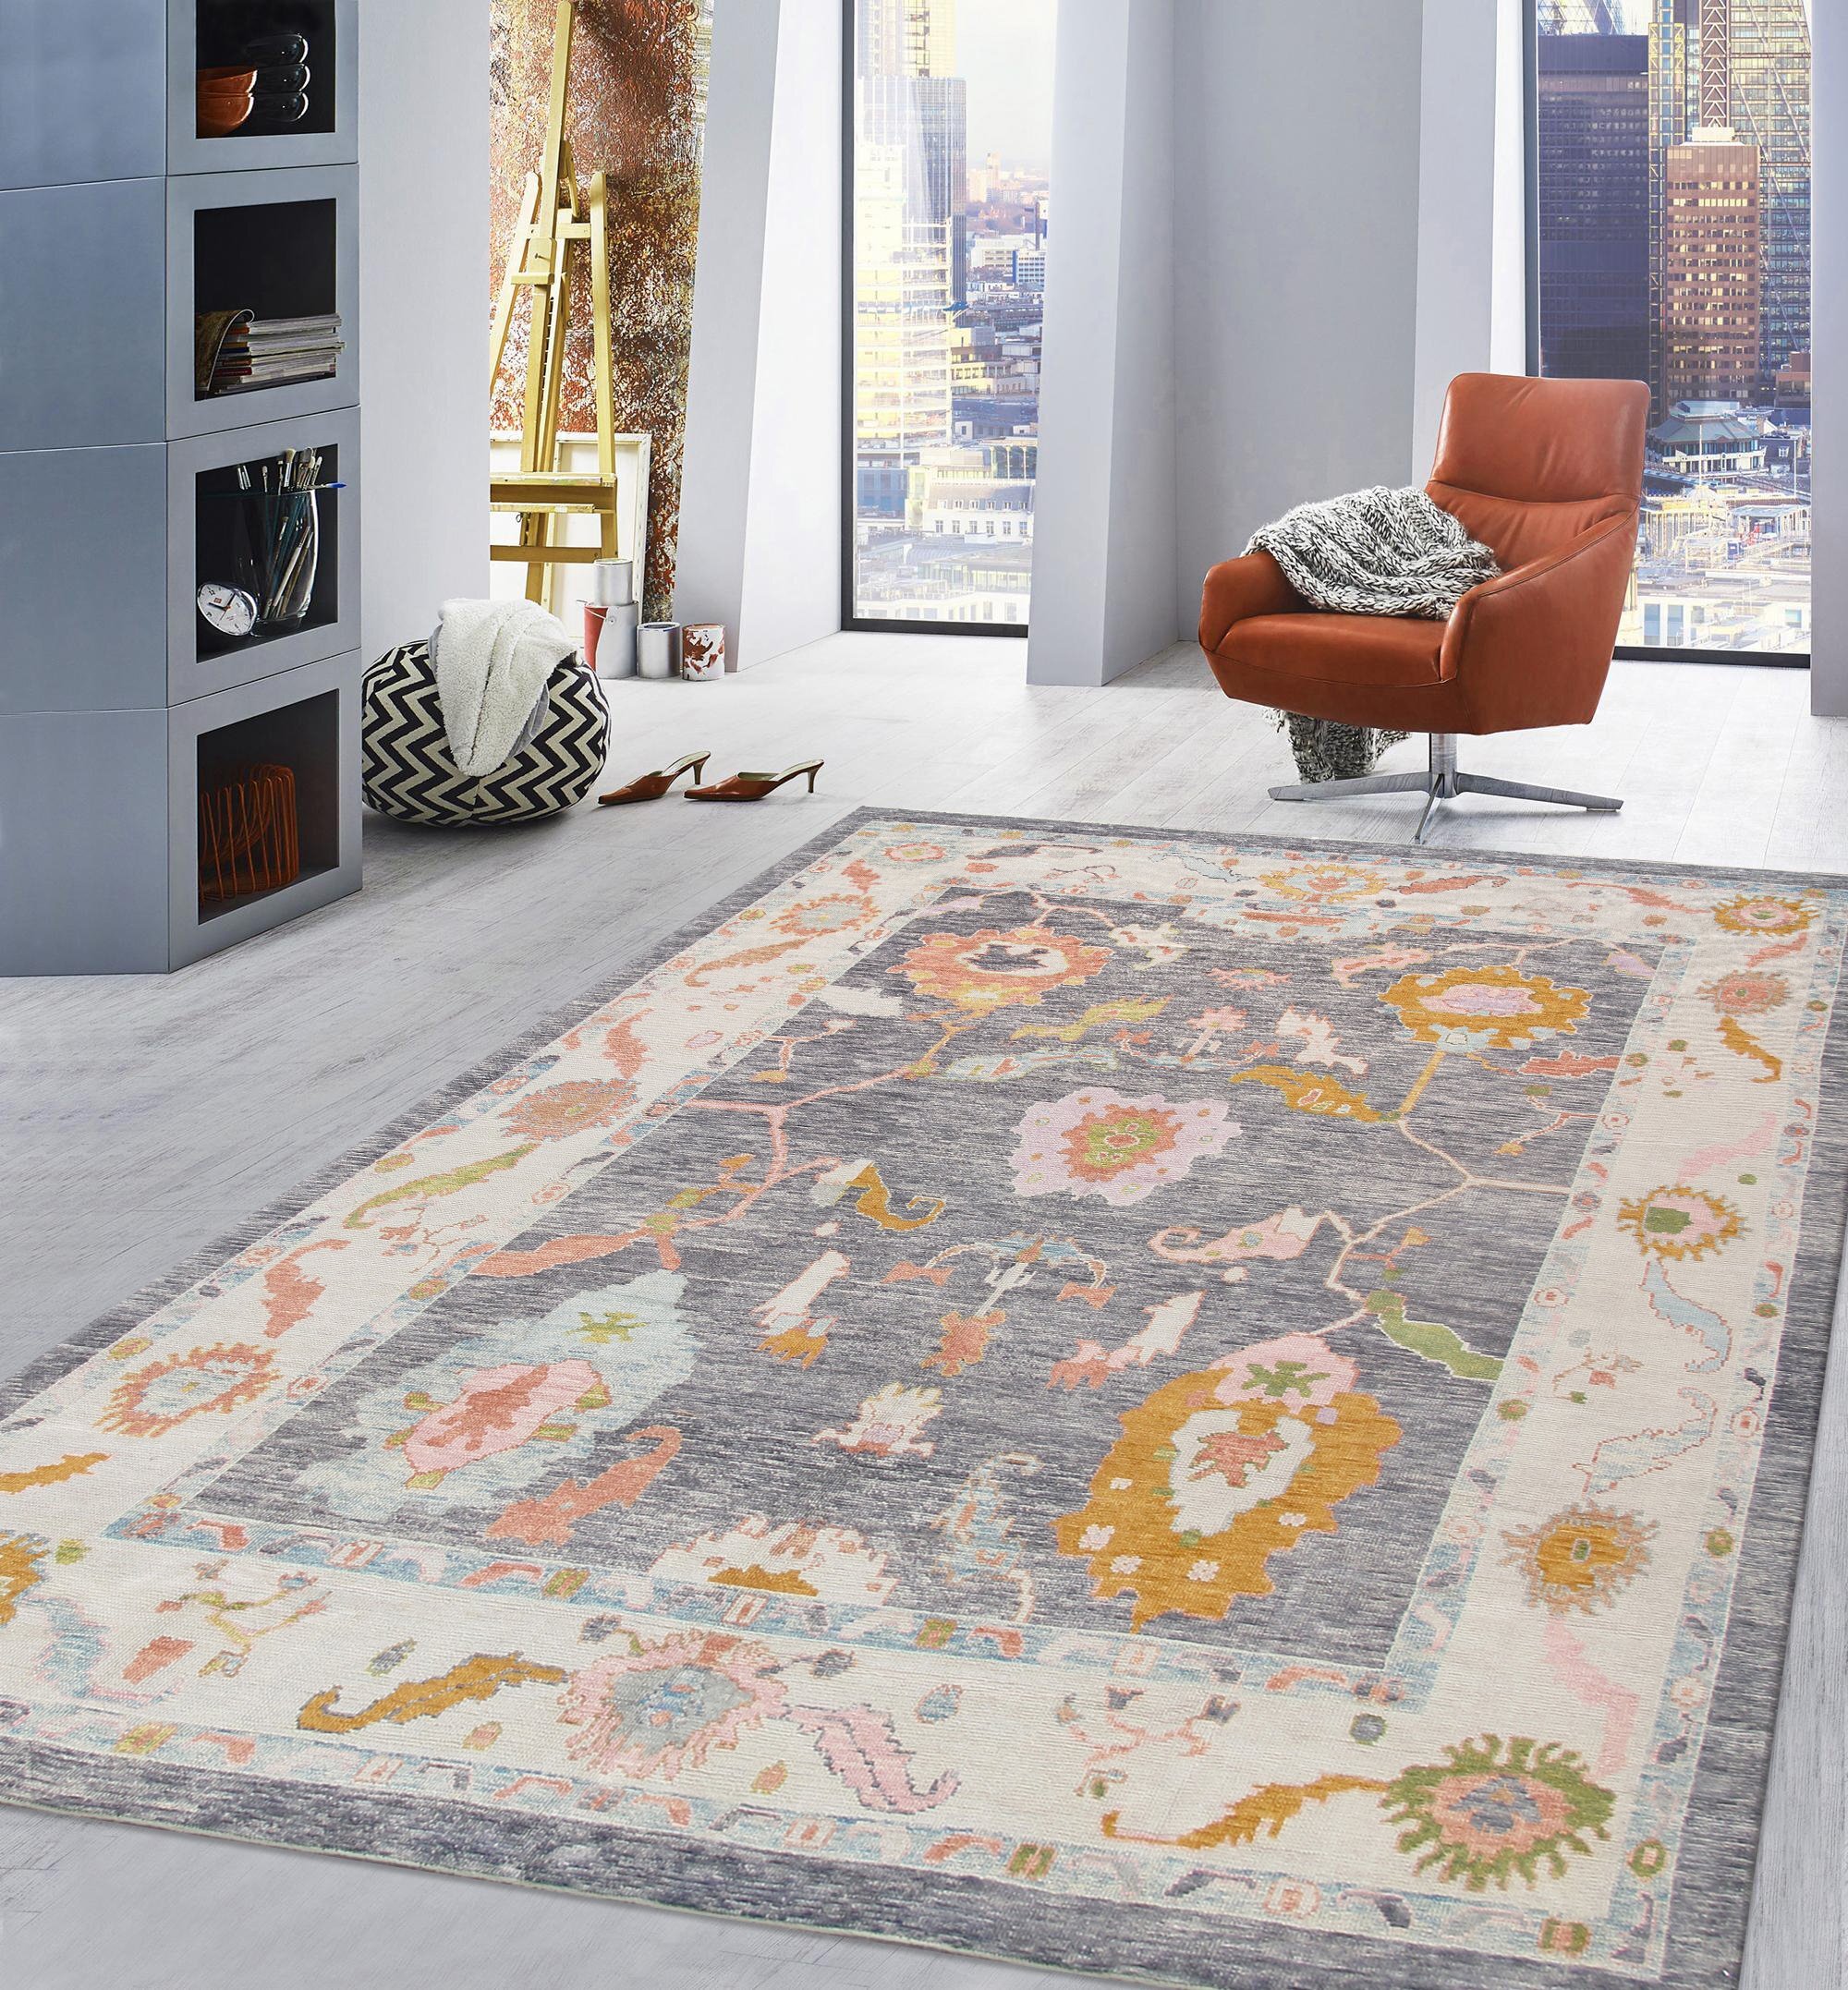 Vintage Floral Classic Design 10X13 Hand-Knotted Oriental Area Rug